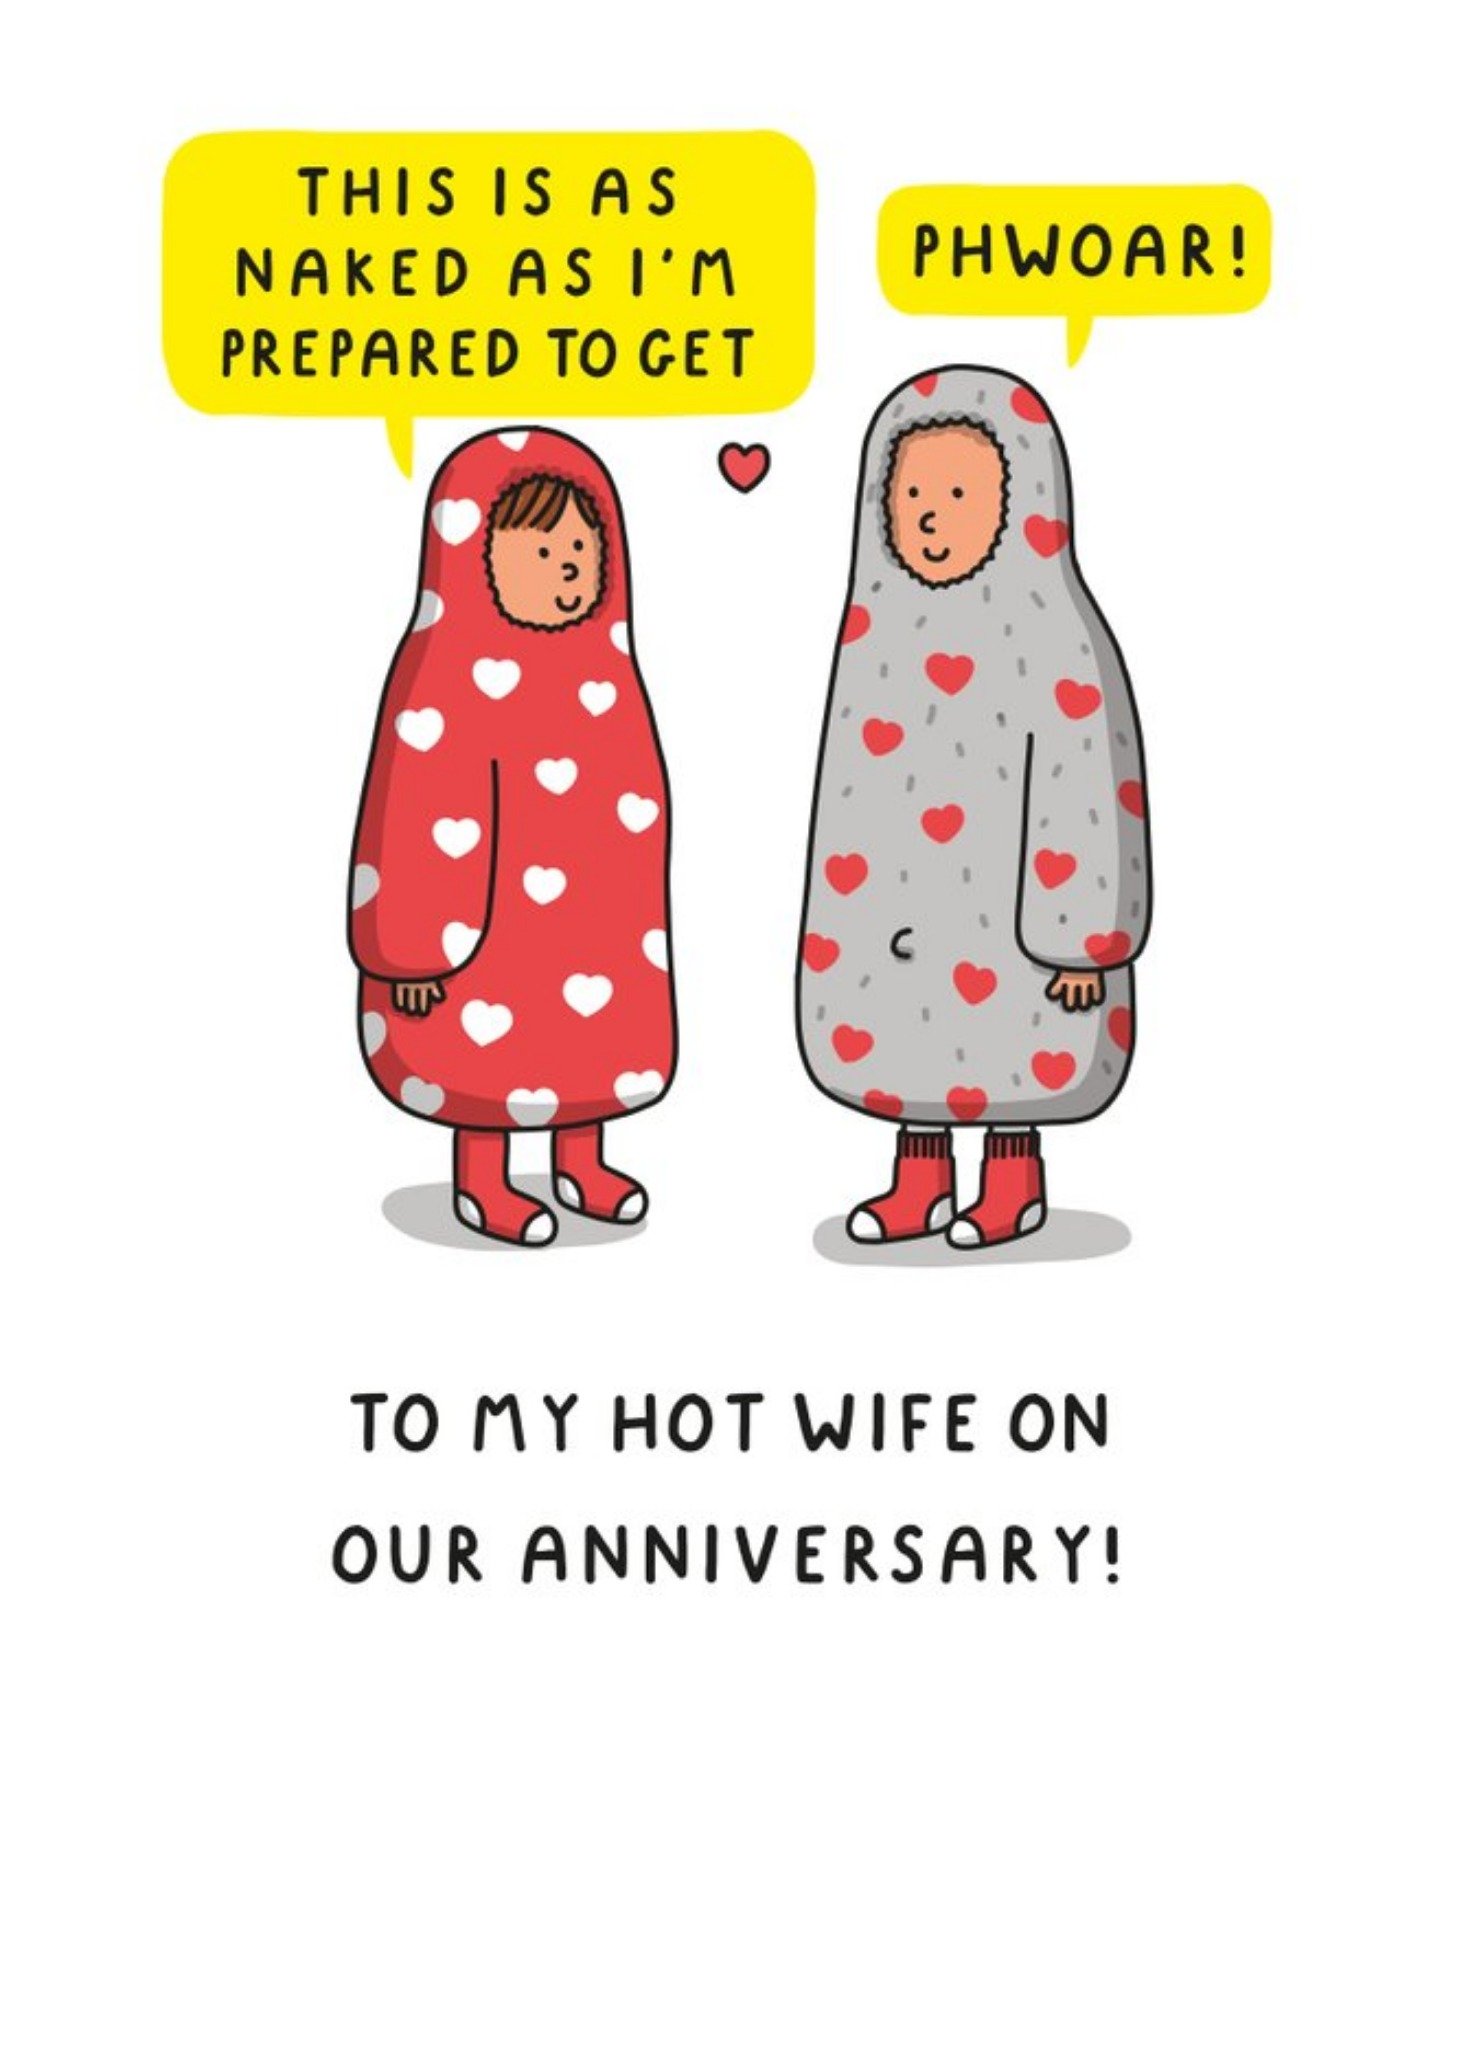 Moonpig Illustration Of A Couple Wearing Oodies Humorous Anniversary Card Ecard